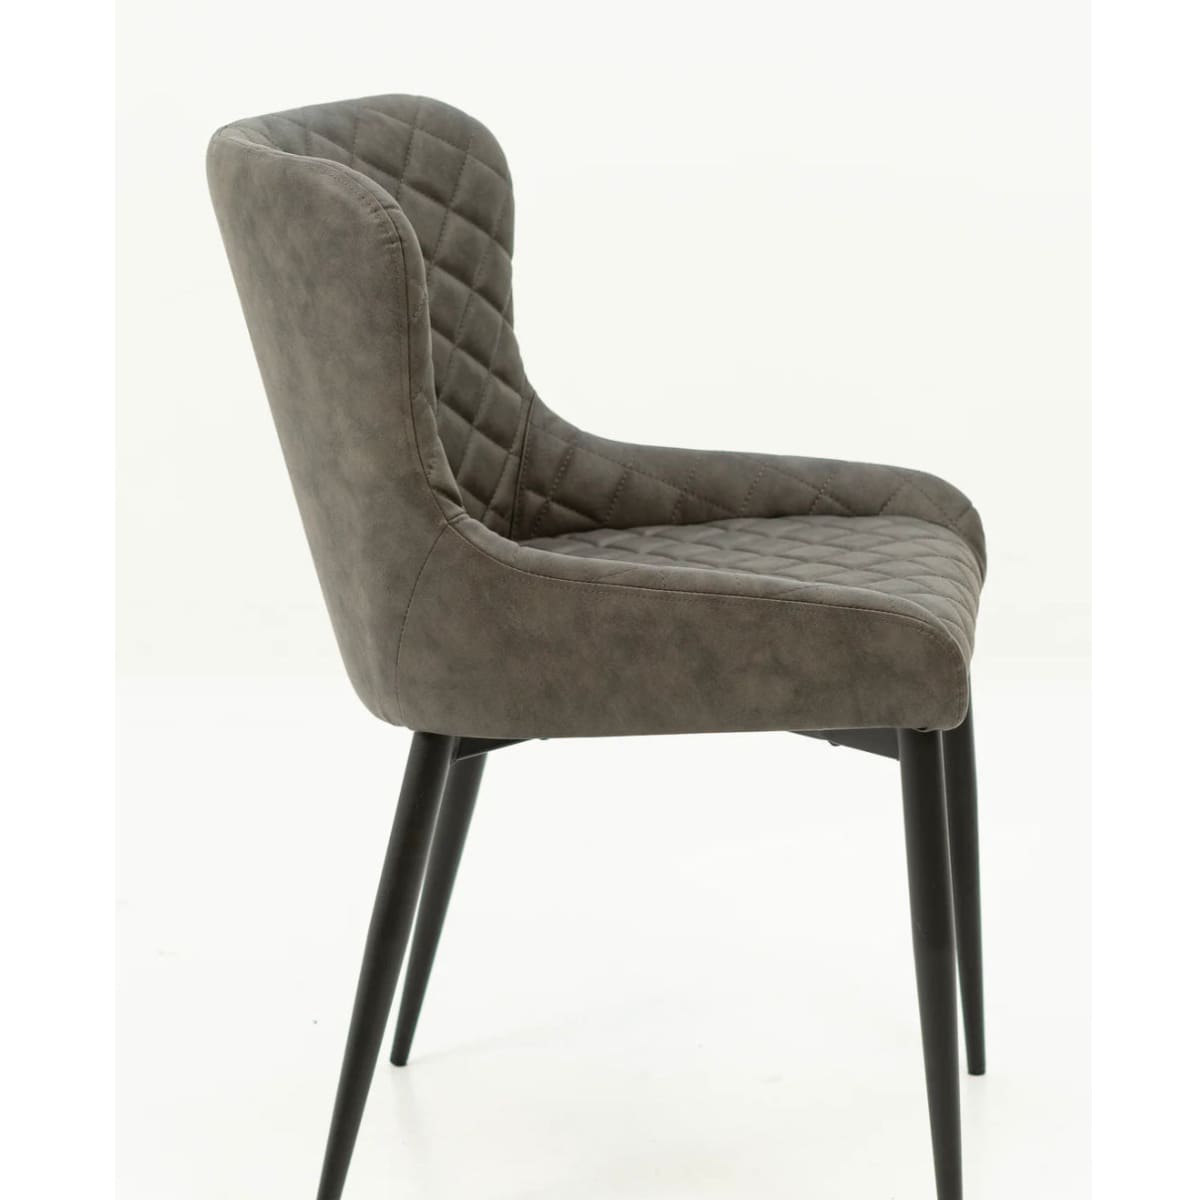 QUINN UPHOLSTERED DINING CHAIR - GREY DC332-Light Grey Cosy-11